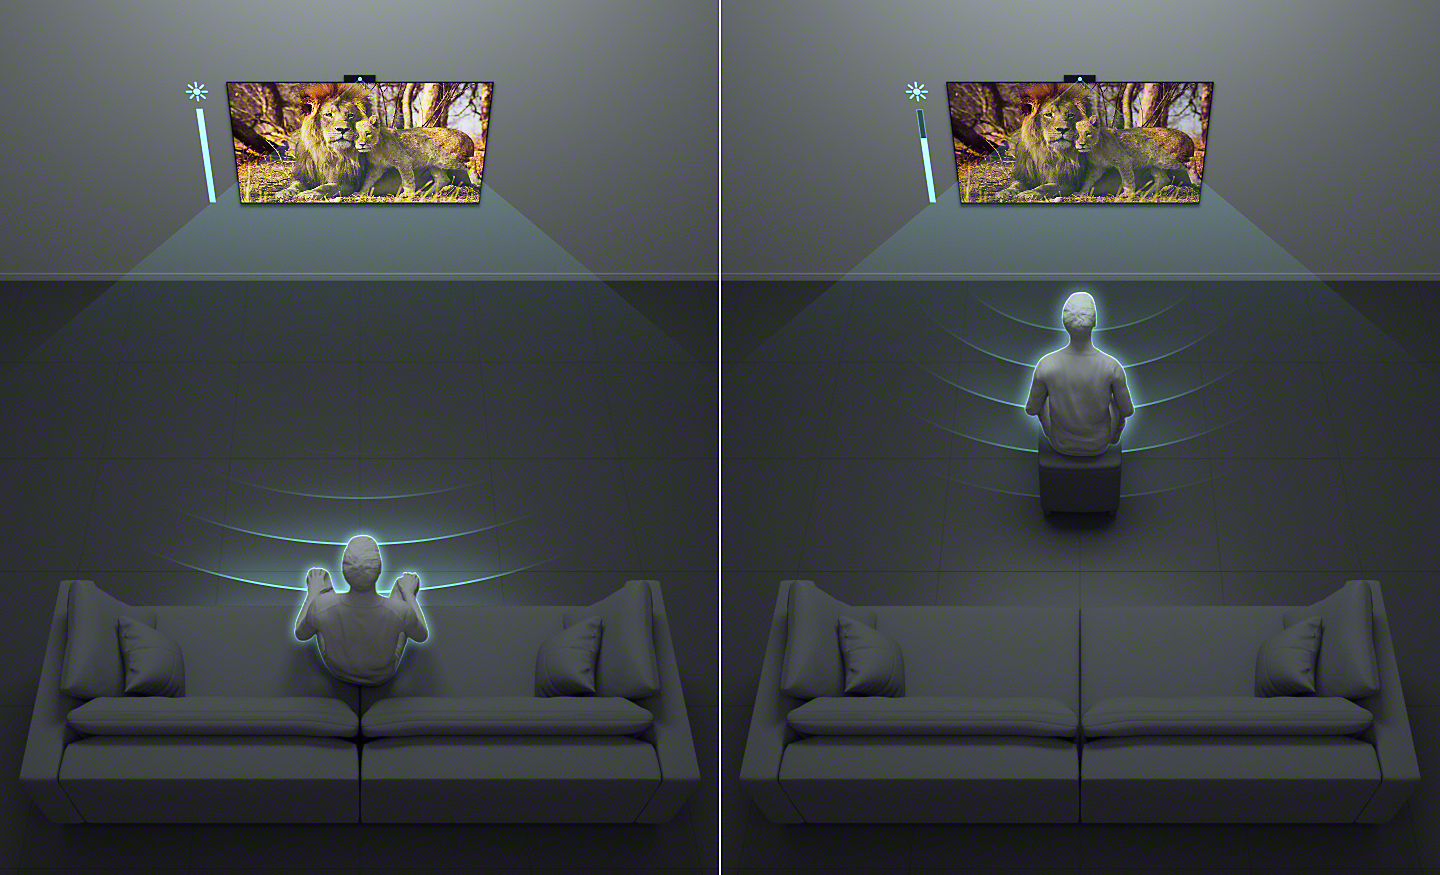 Split-screen graphic showing a person watching TV from afar and a person watching from up close